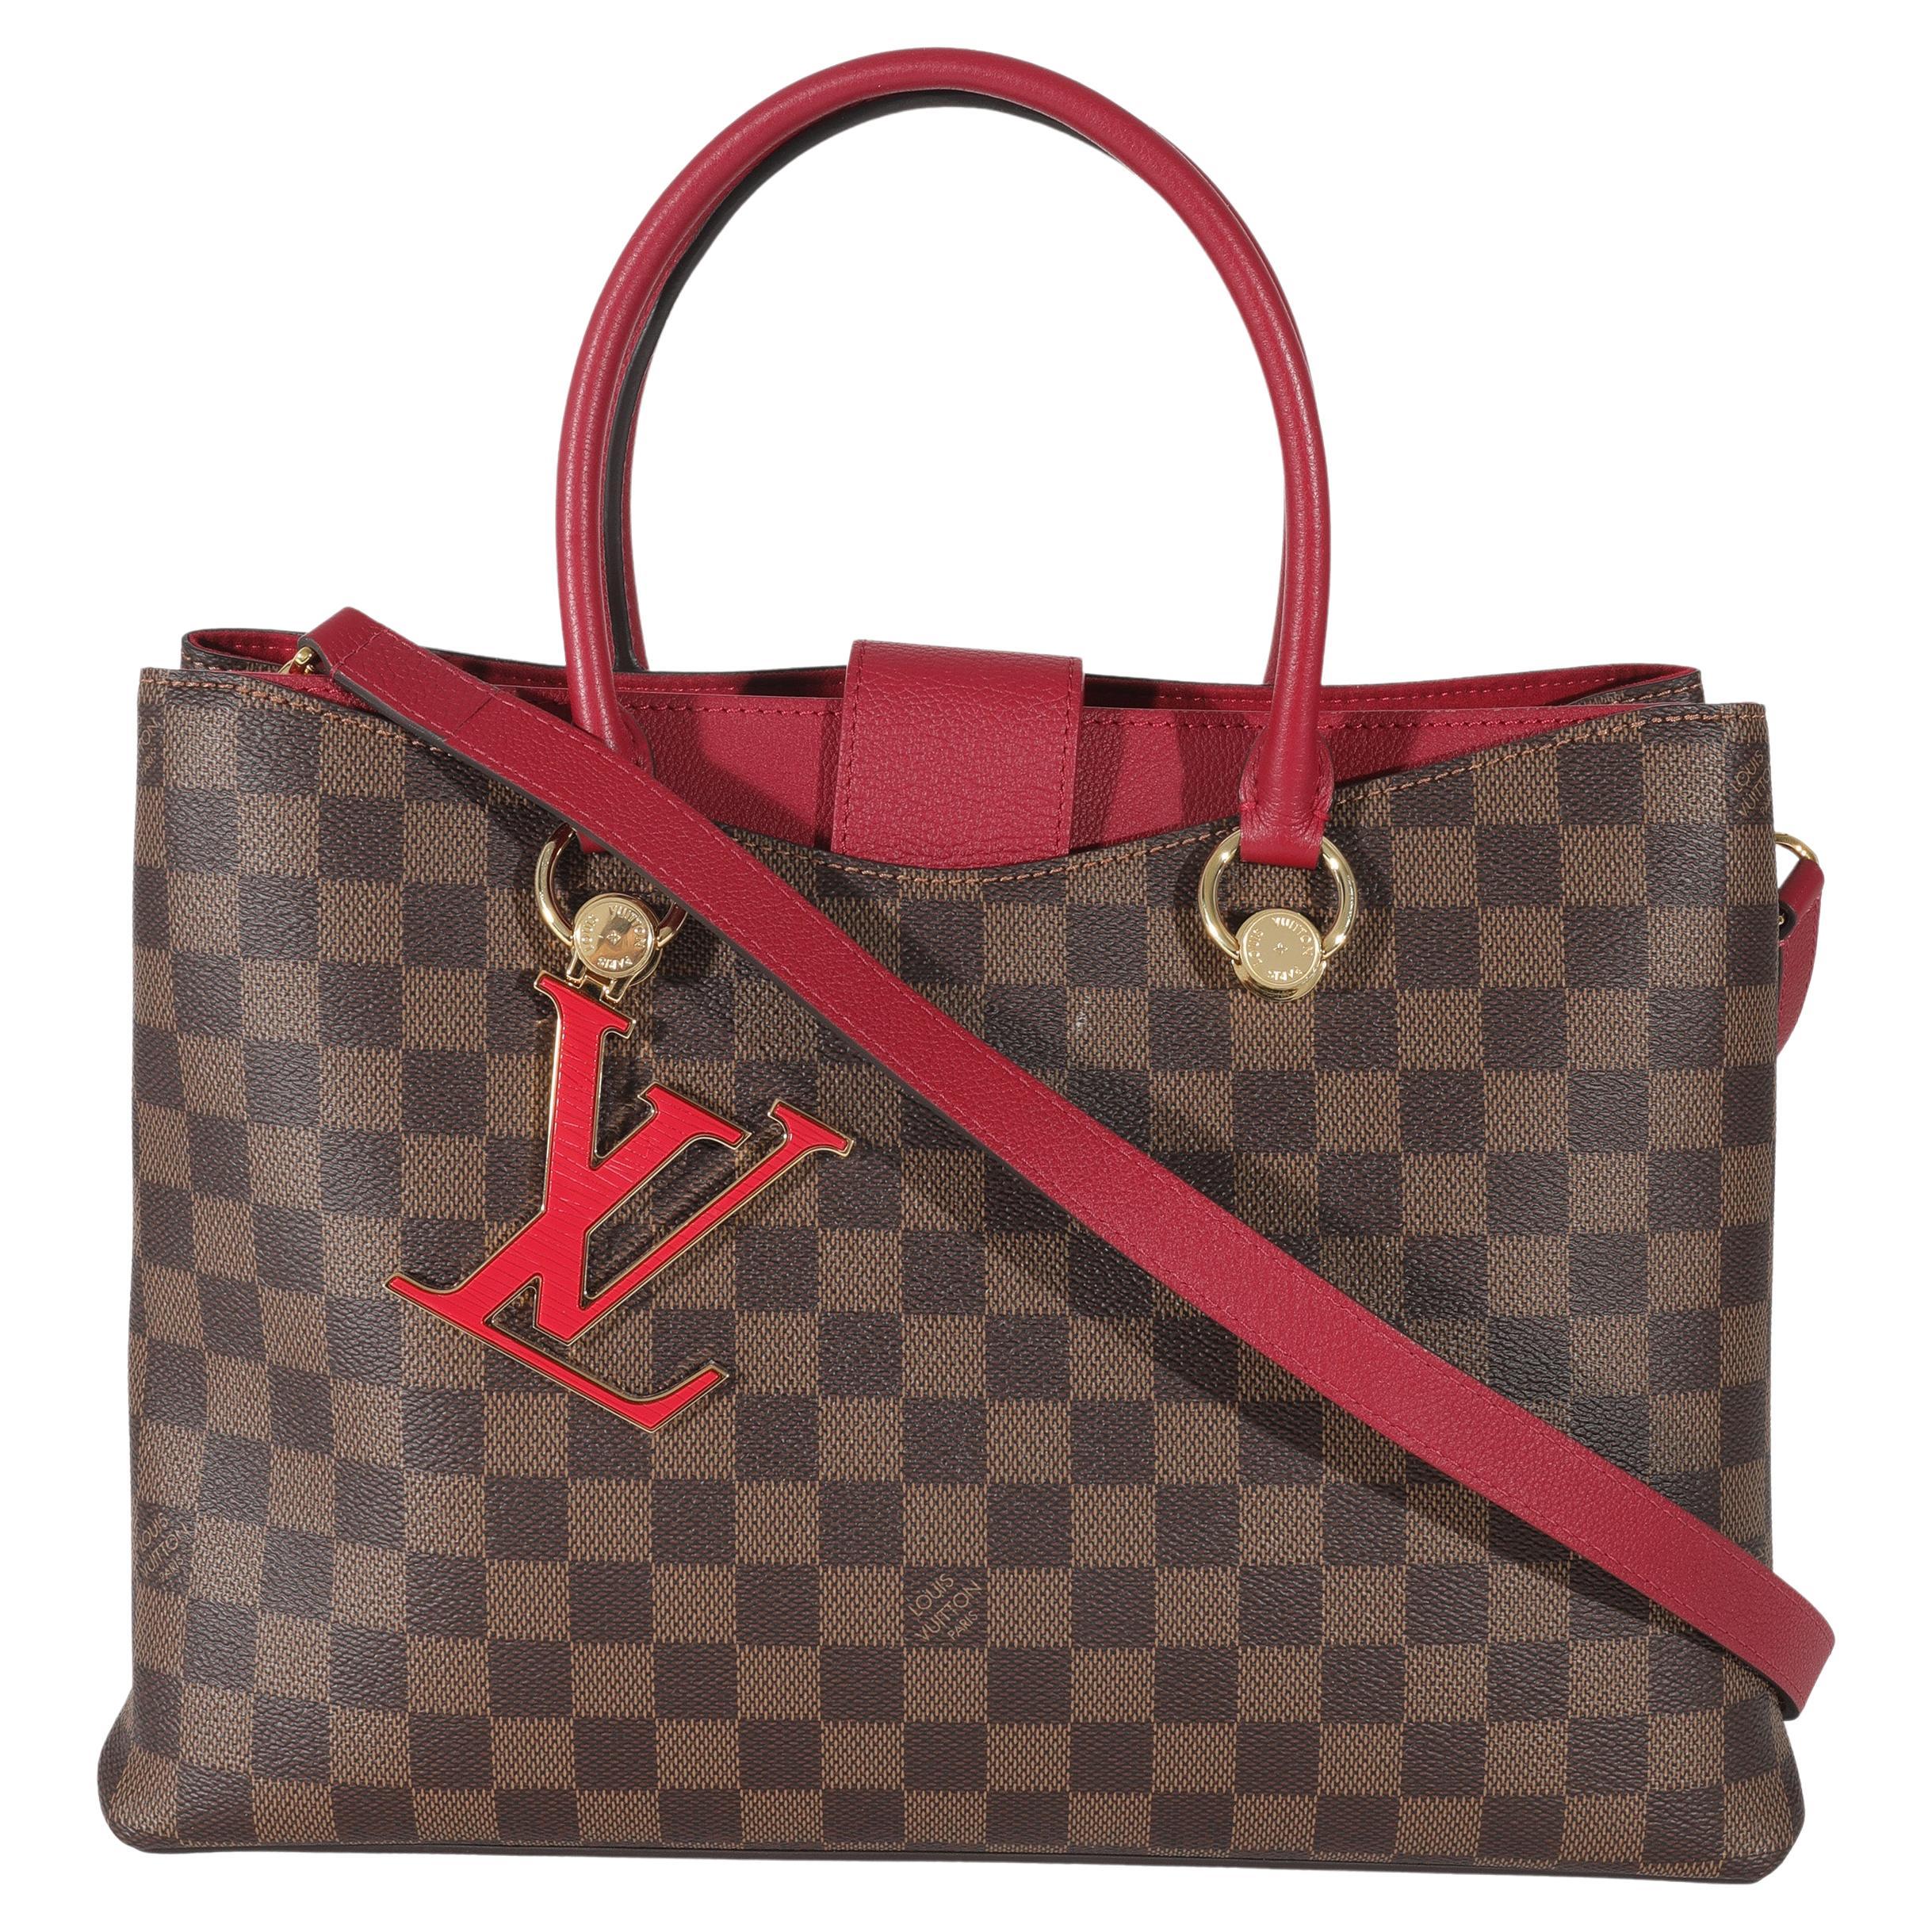 LOUIS VUITTON - RIVERSIDE (fits a 13 laptop) - What's in my bag